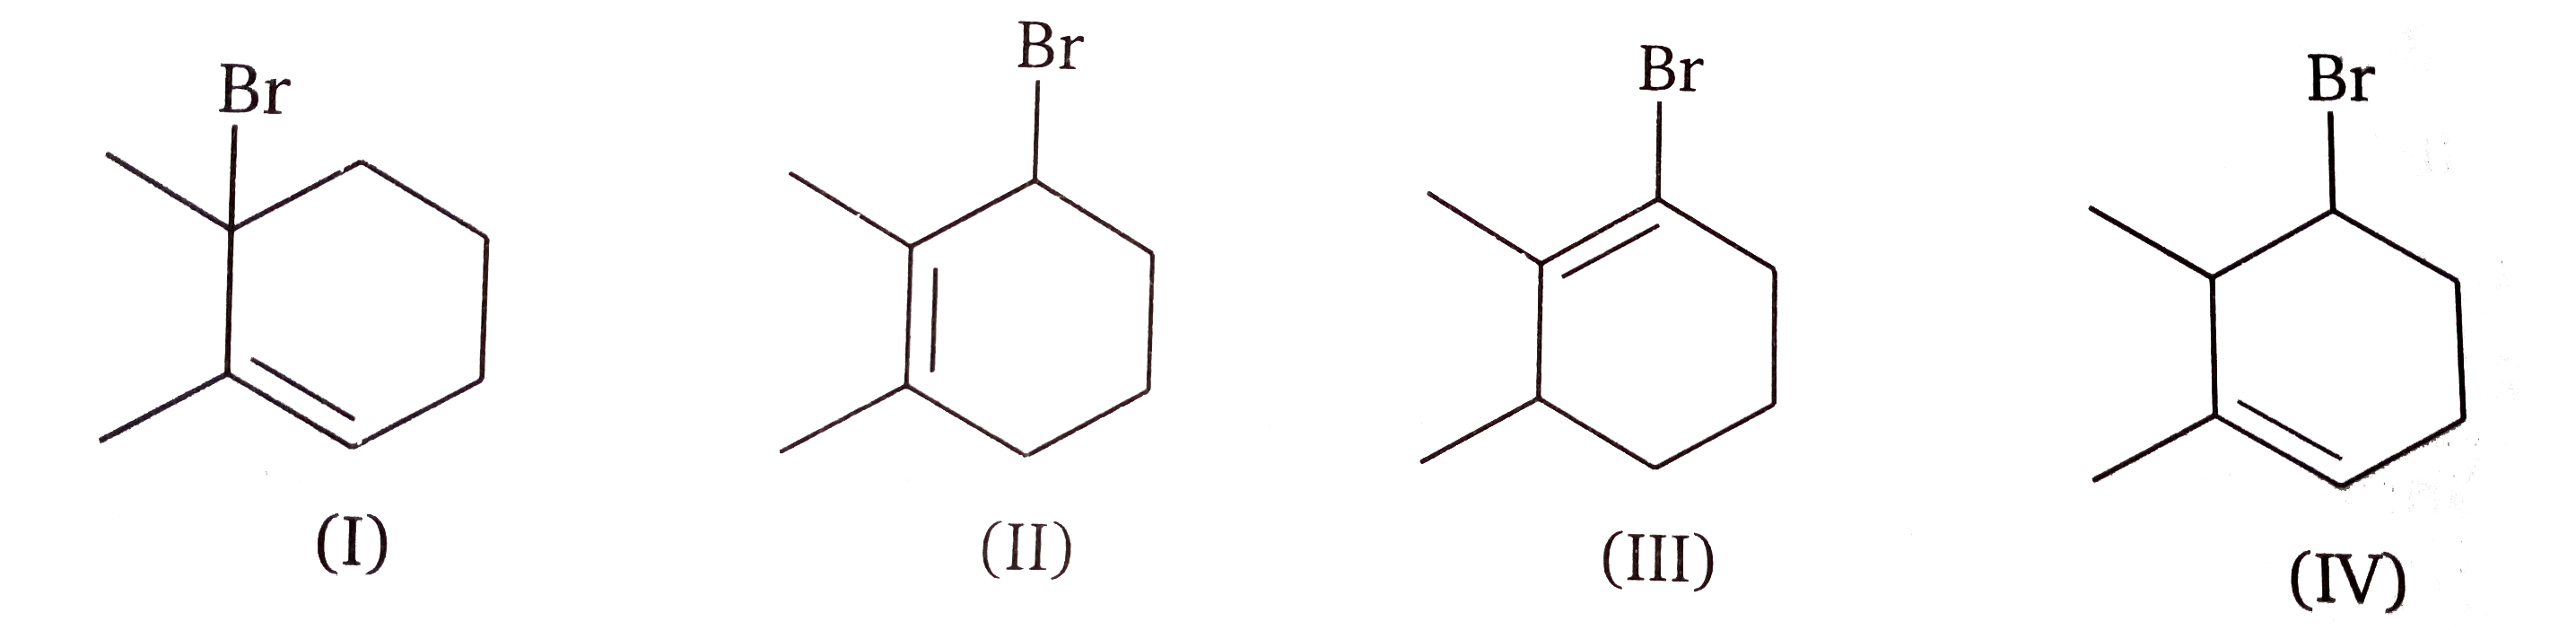 What is the sum of positions assigned to bromine while numbering the Parent Chain in the below compounds?